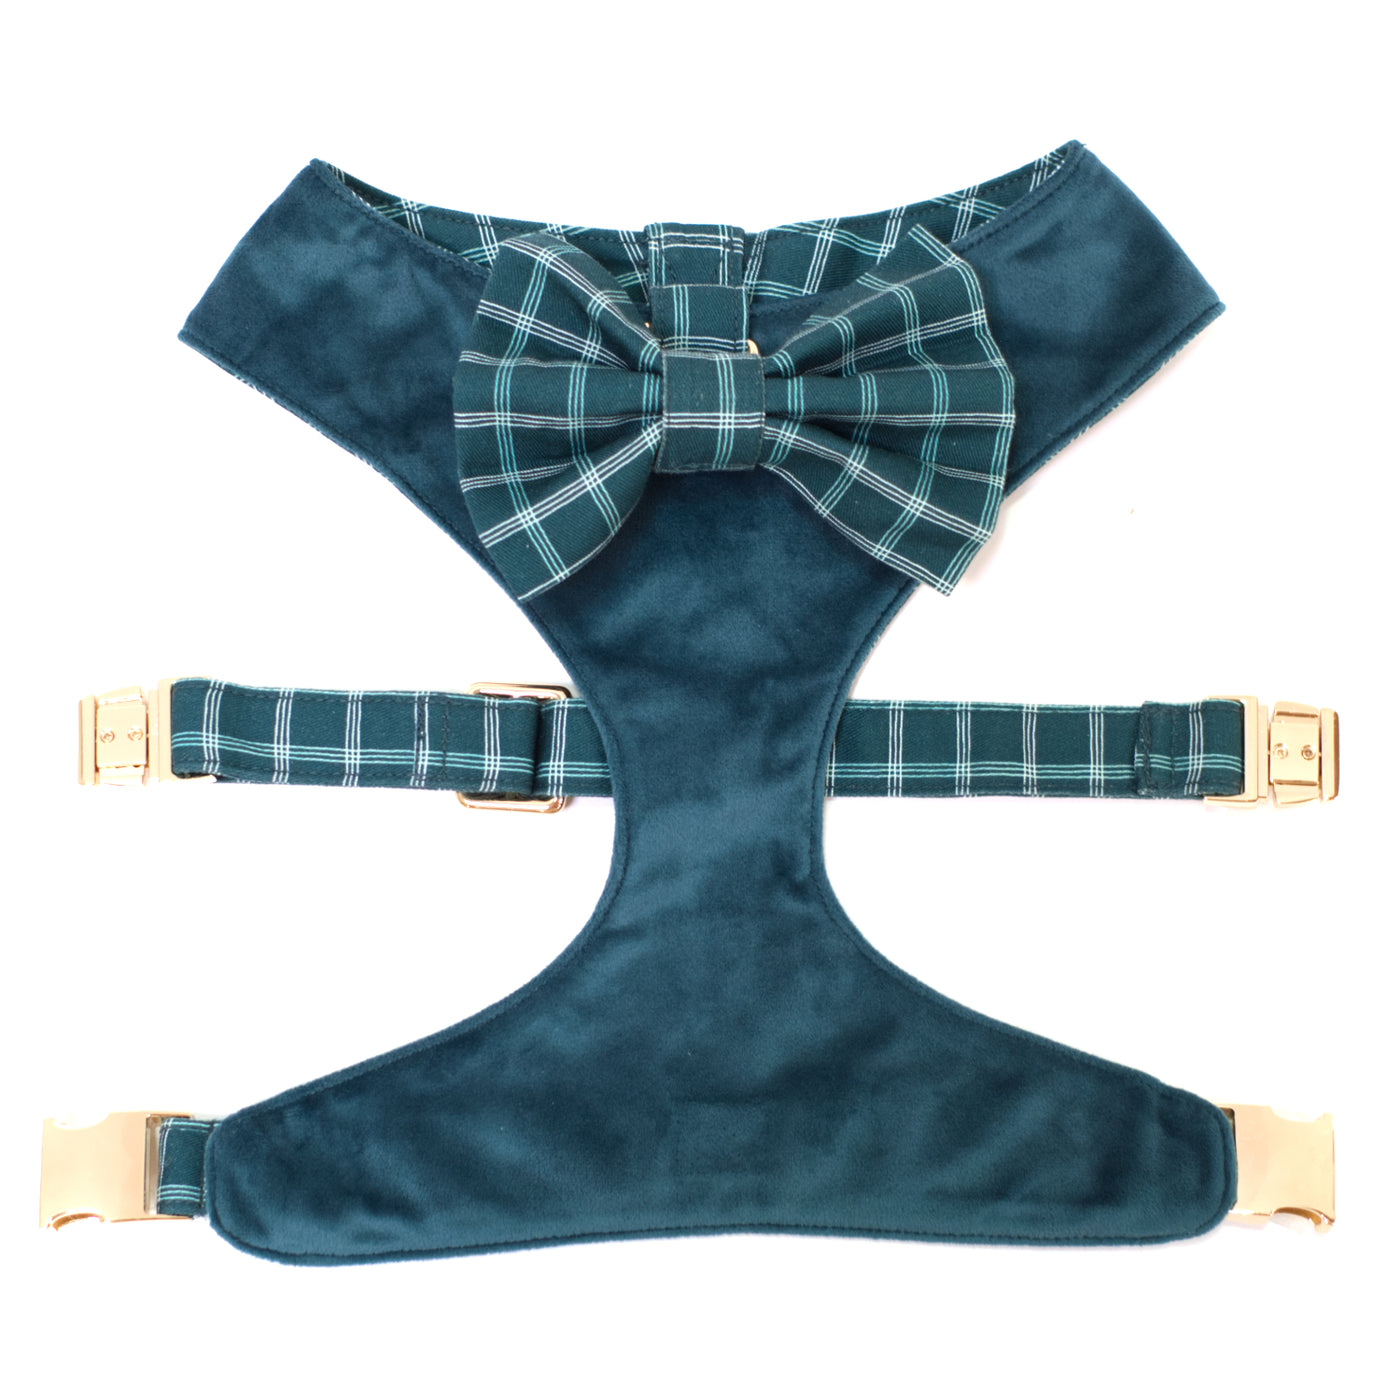 Teal velvet reversible dog harness with coordinating windowpane plaid bow tie and gold hardware